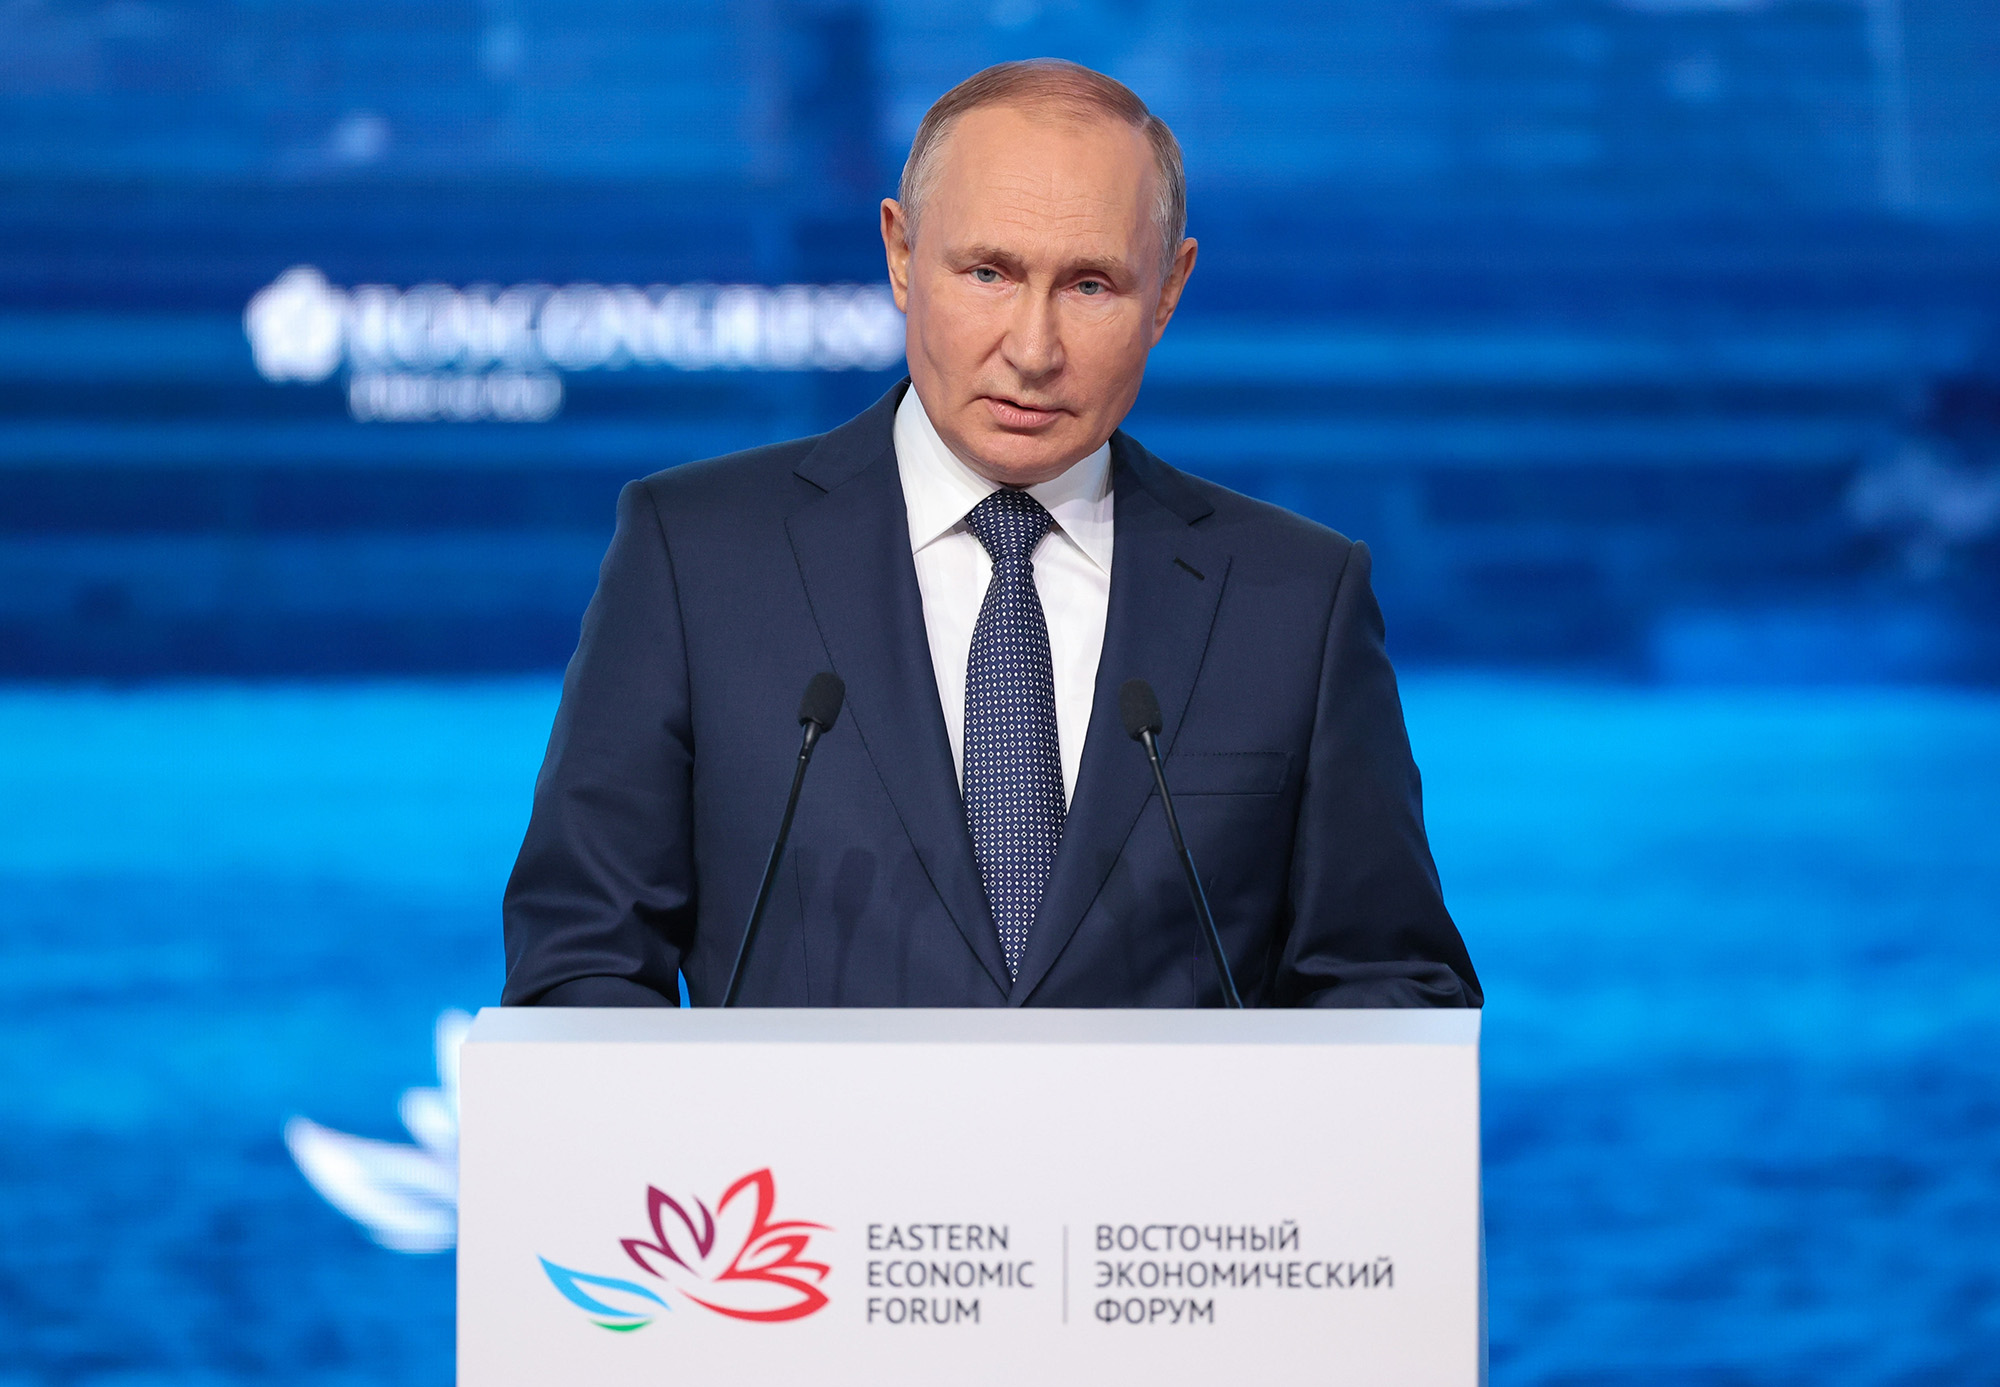 Russian President Vladimir Putin delivers a speech during a plenary session at the Eastern Economic Forum in Vladivostok, Russia, on September 7.